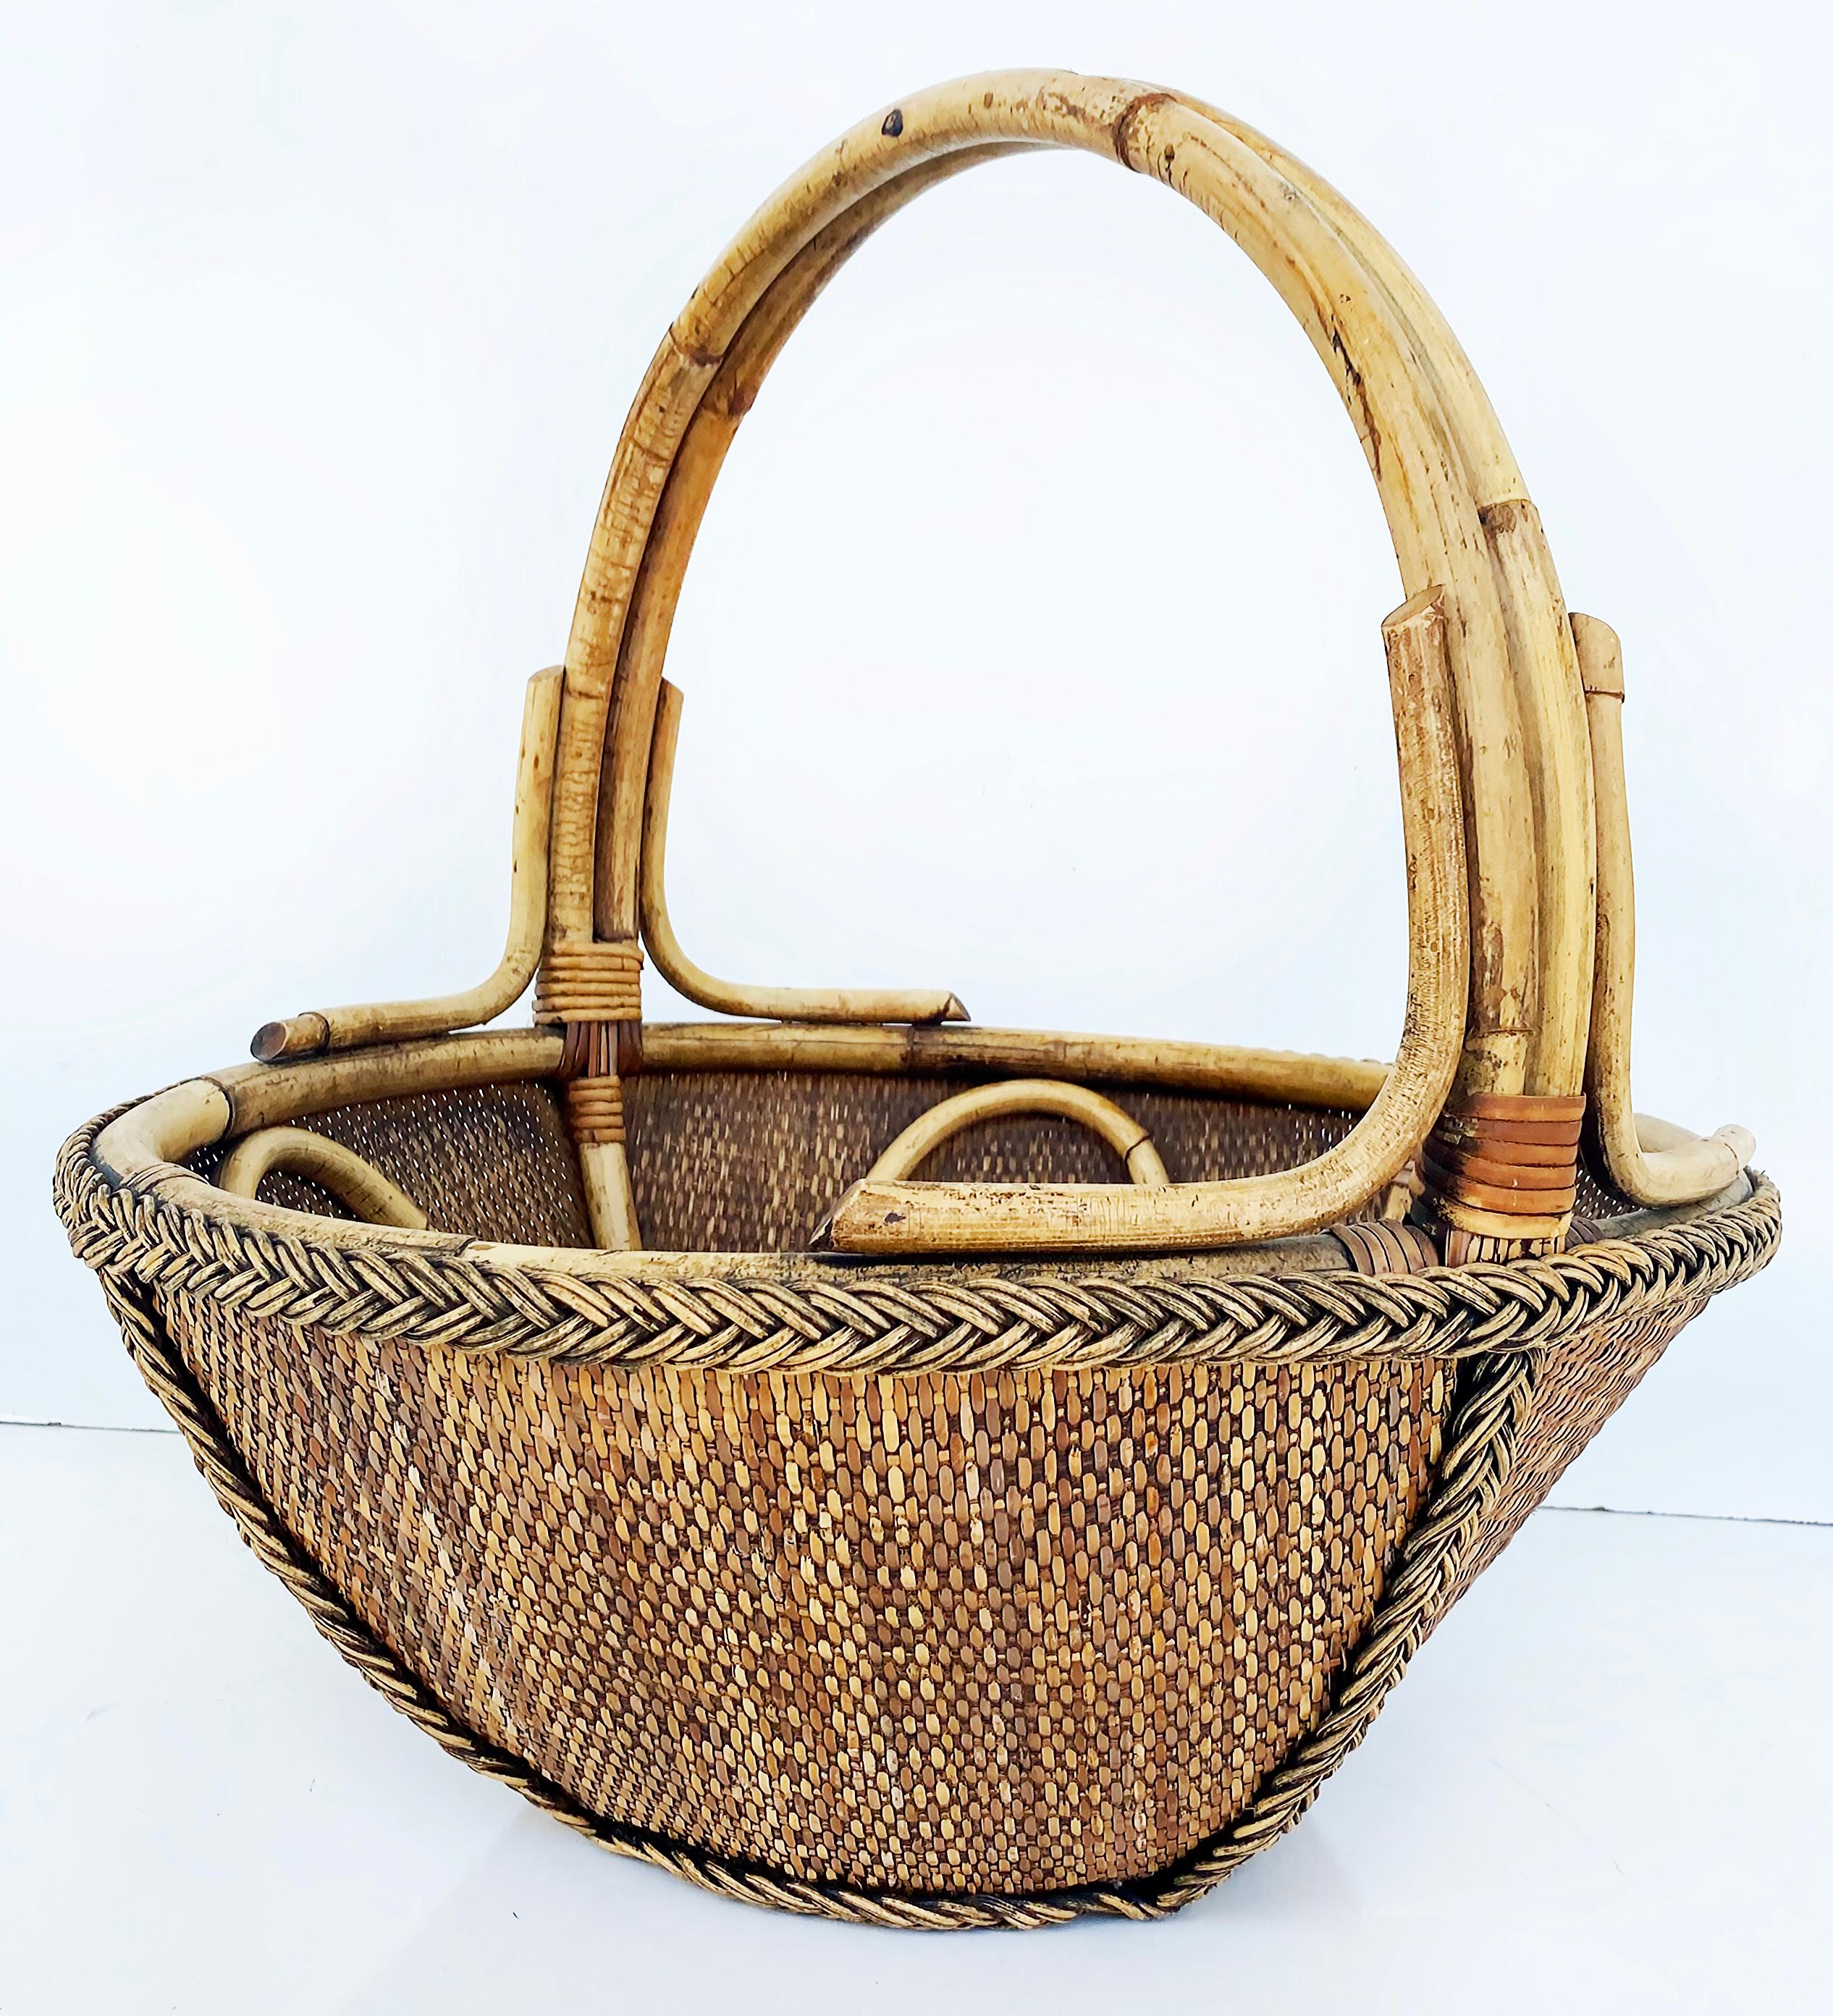 Hand-Woven Rattan and Reed Basket with Handle and Braided Border In Good Condition For Sale In Miami, FL